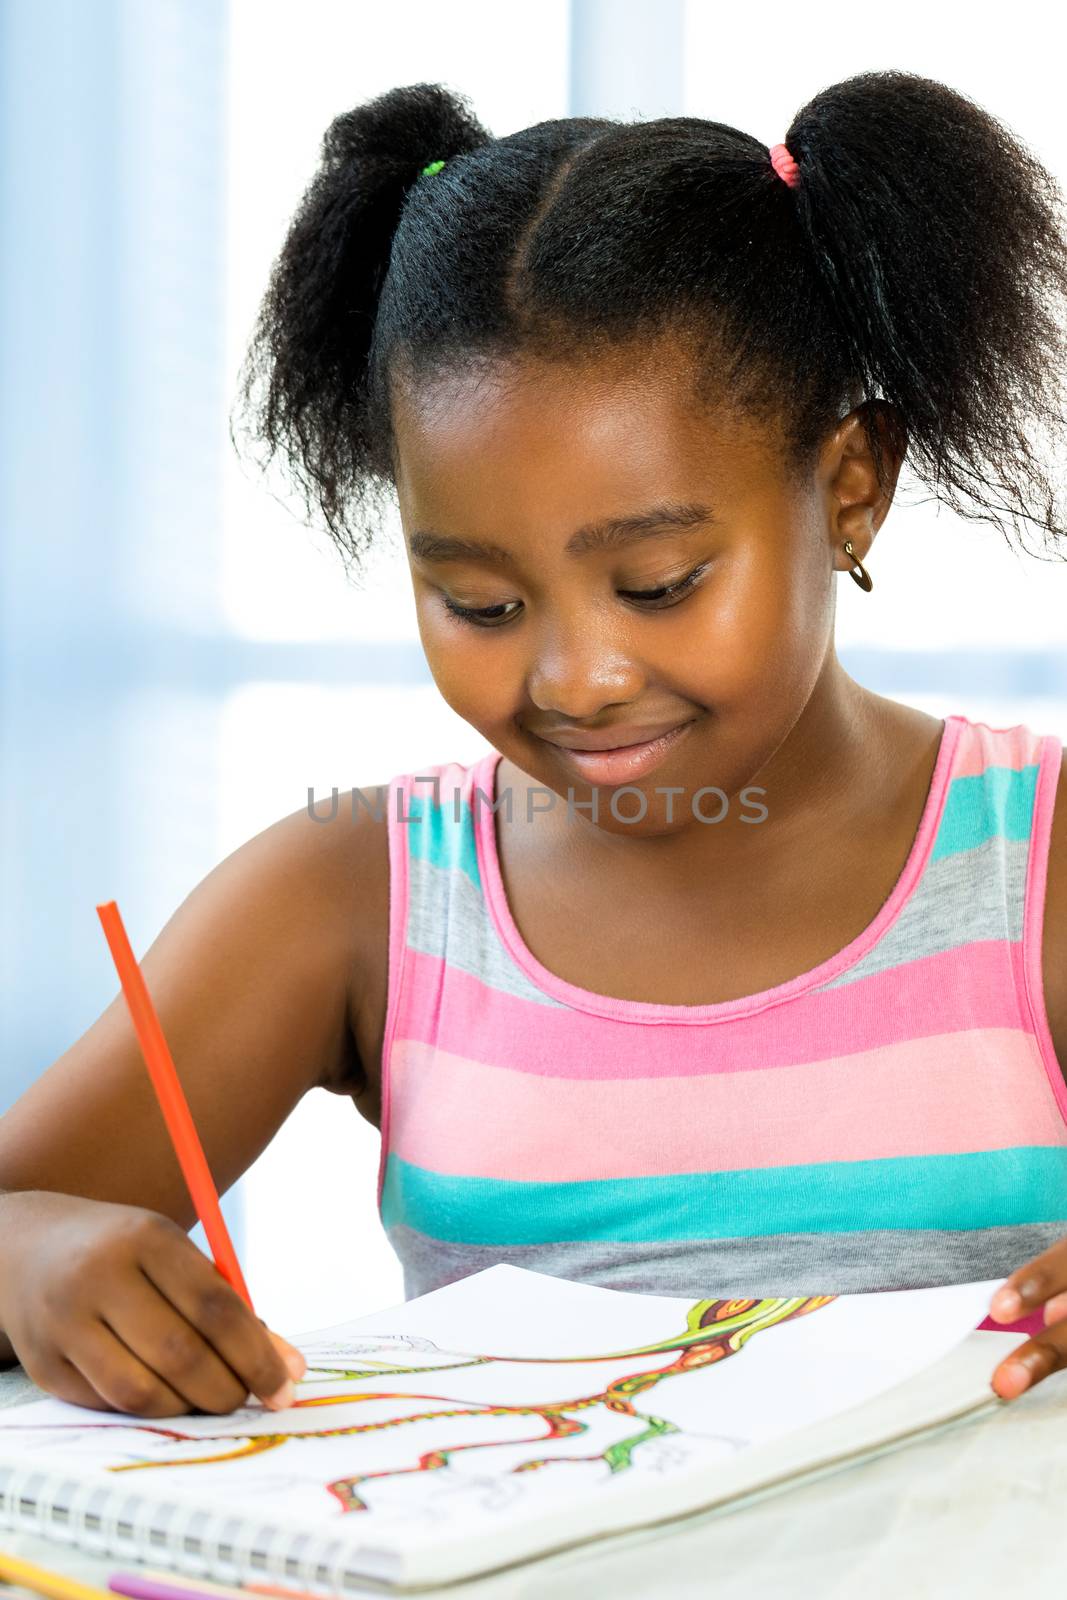 Close up portrait of creative little african girl drawing at desk.Kid creating colorful drawing with color pencils.